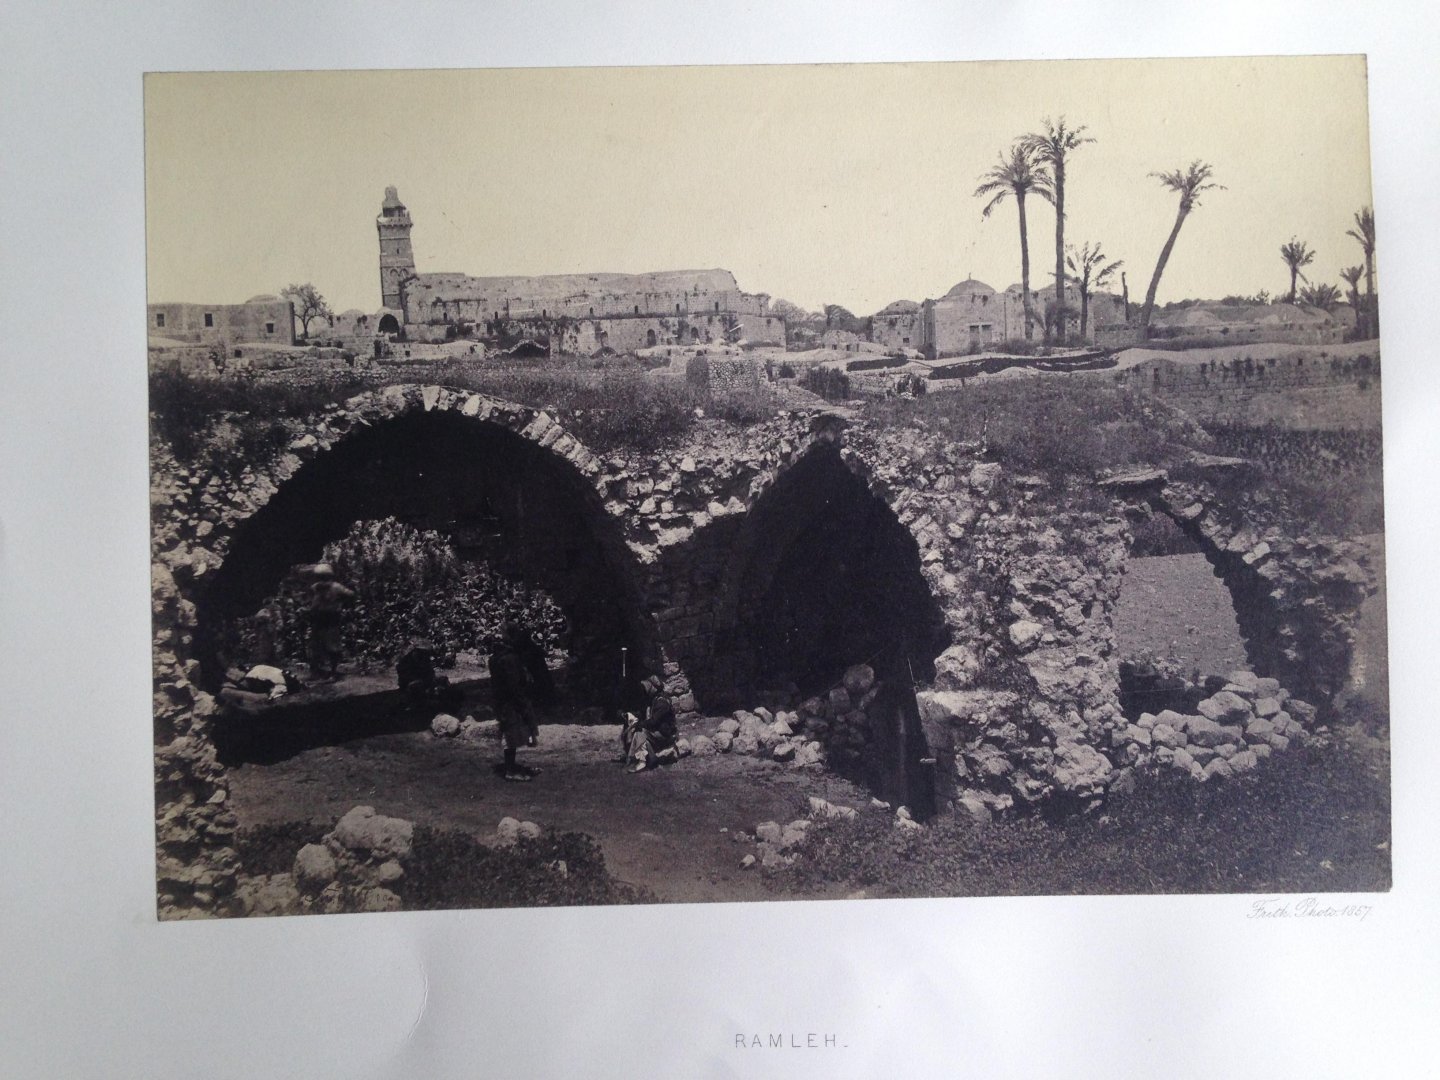 Frith, Francis - Ramleh, Series Egypt and Palestine